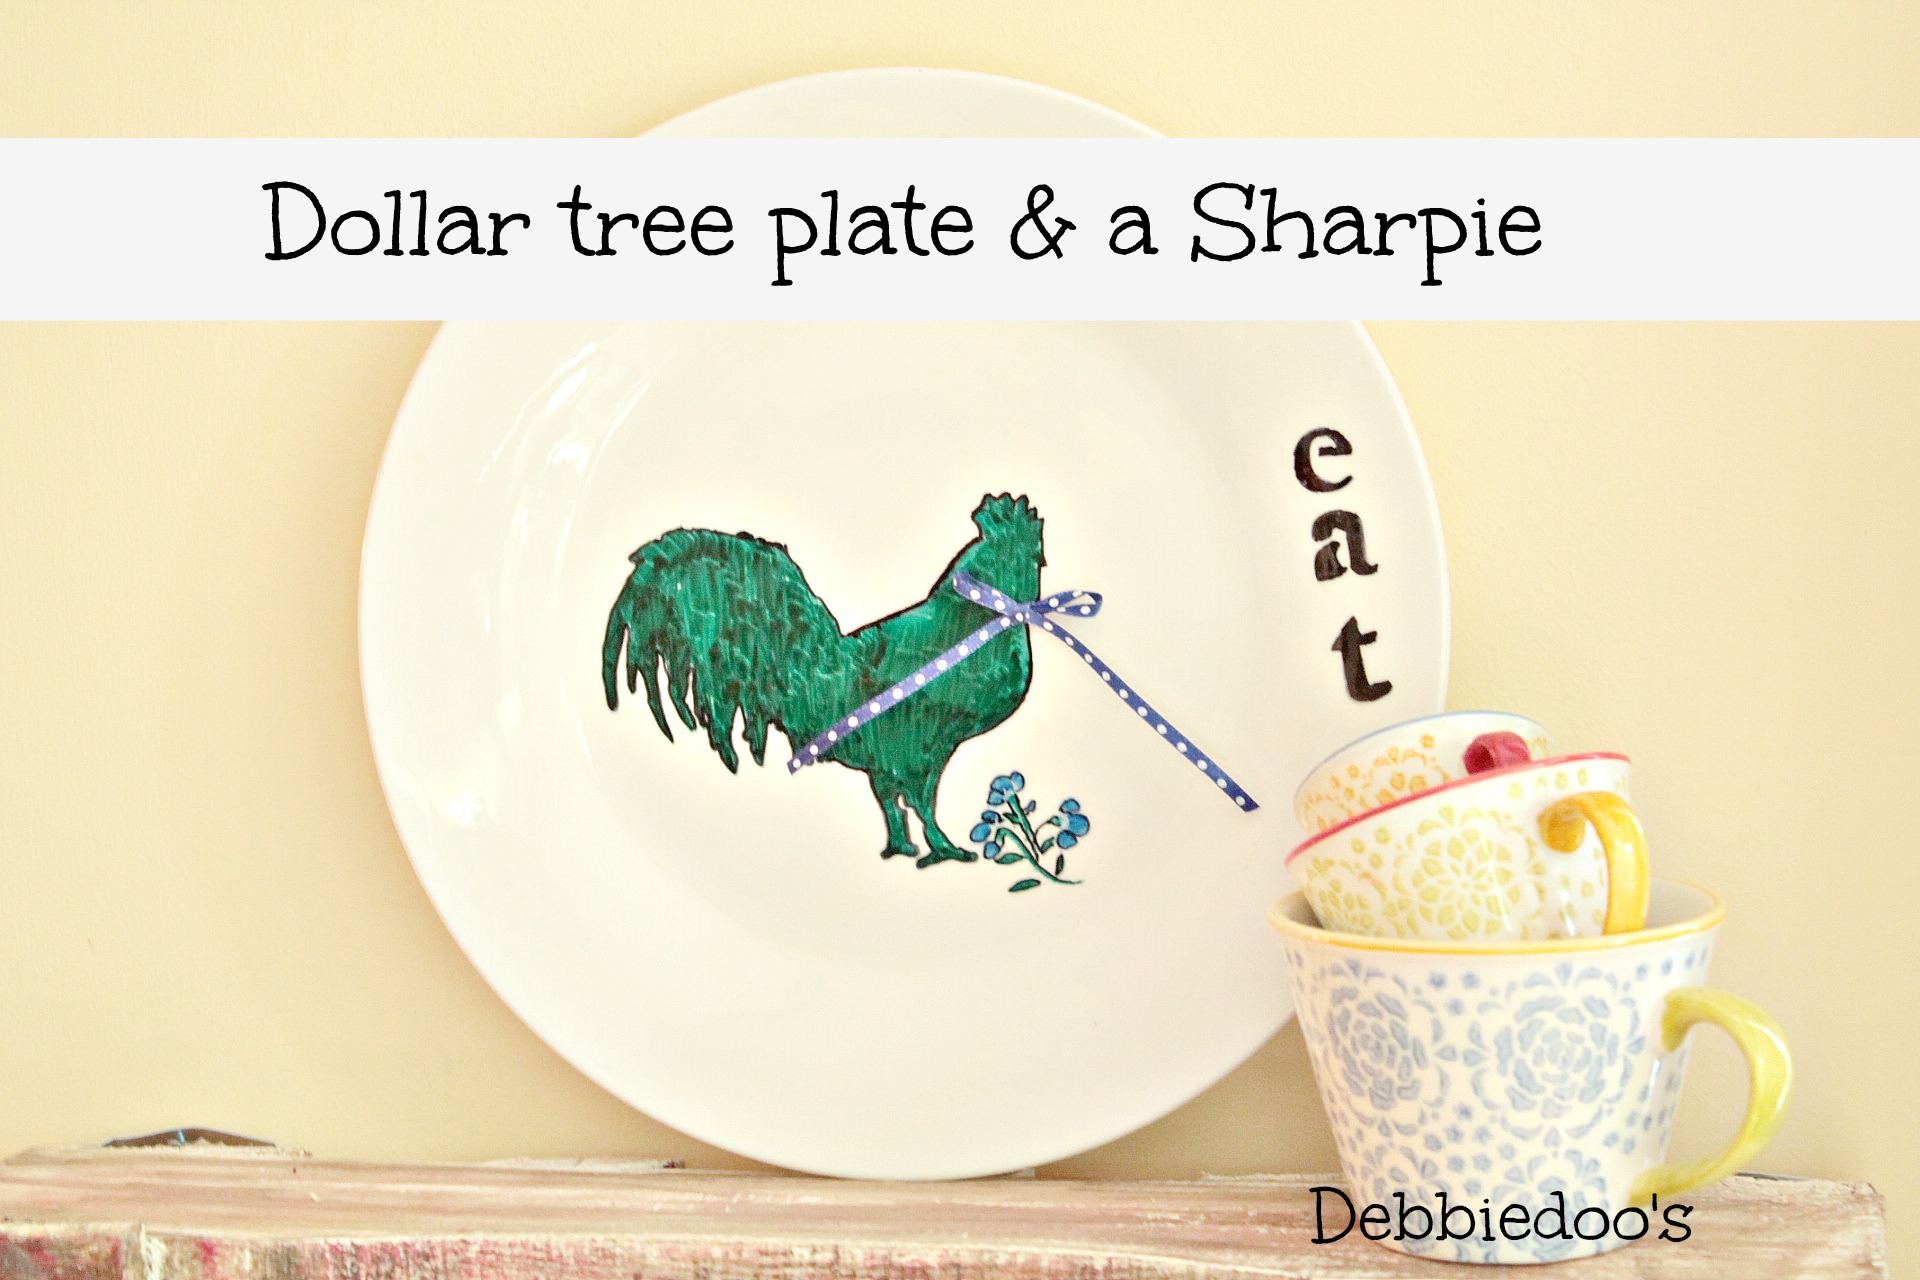 Dollar tree plate with sharpie a rooster and time to eat